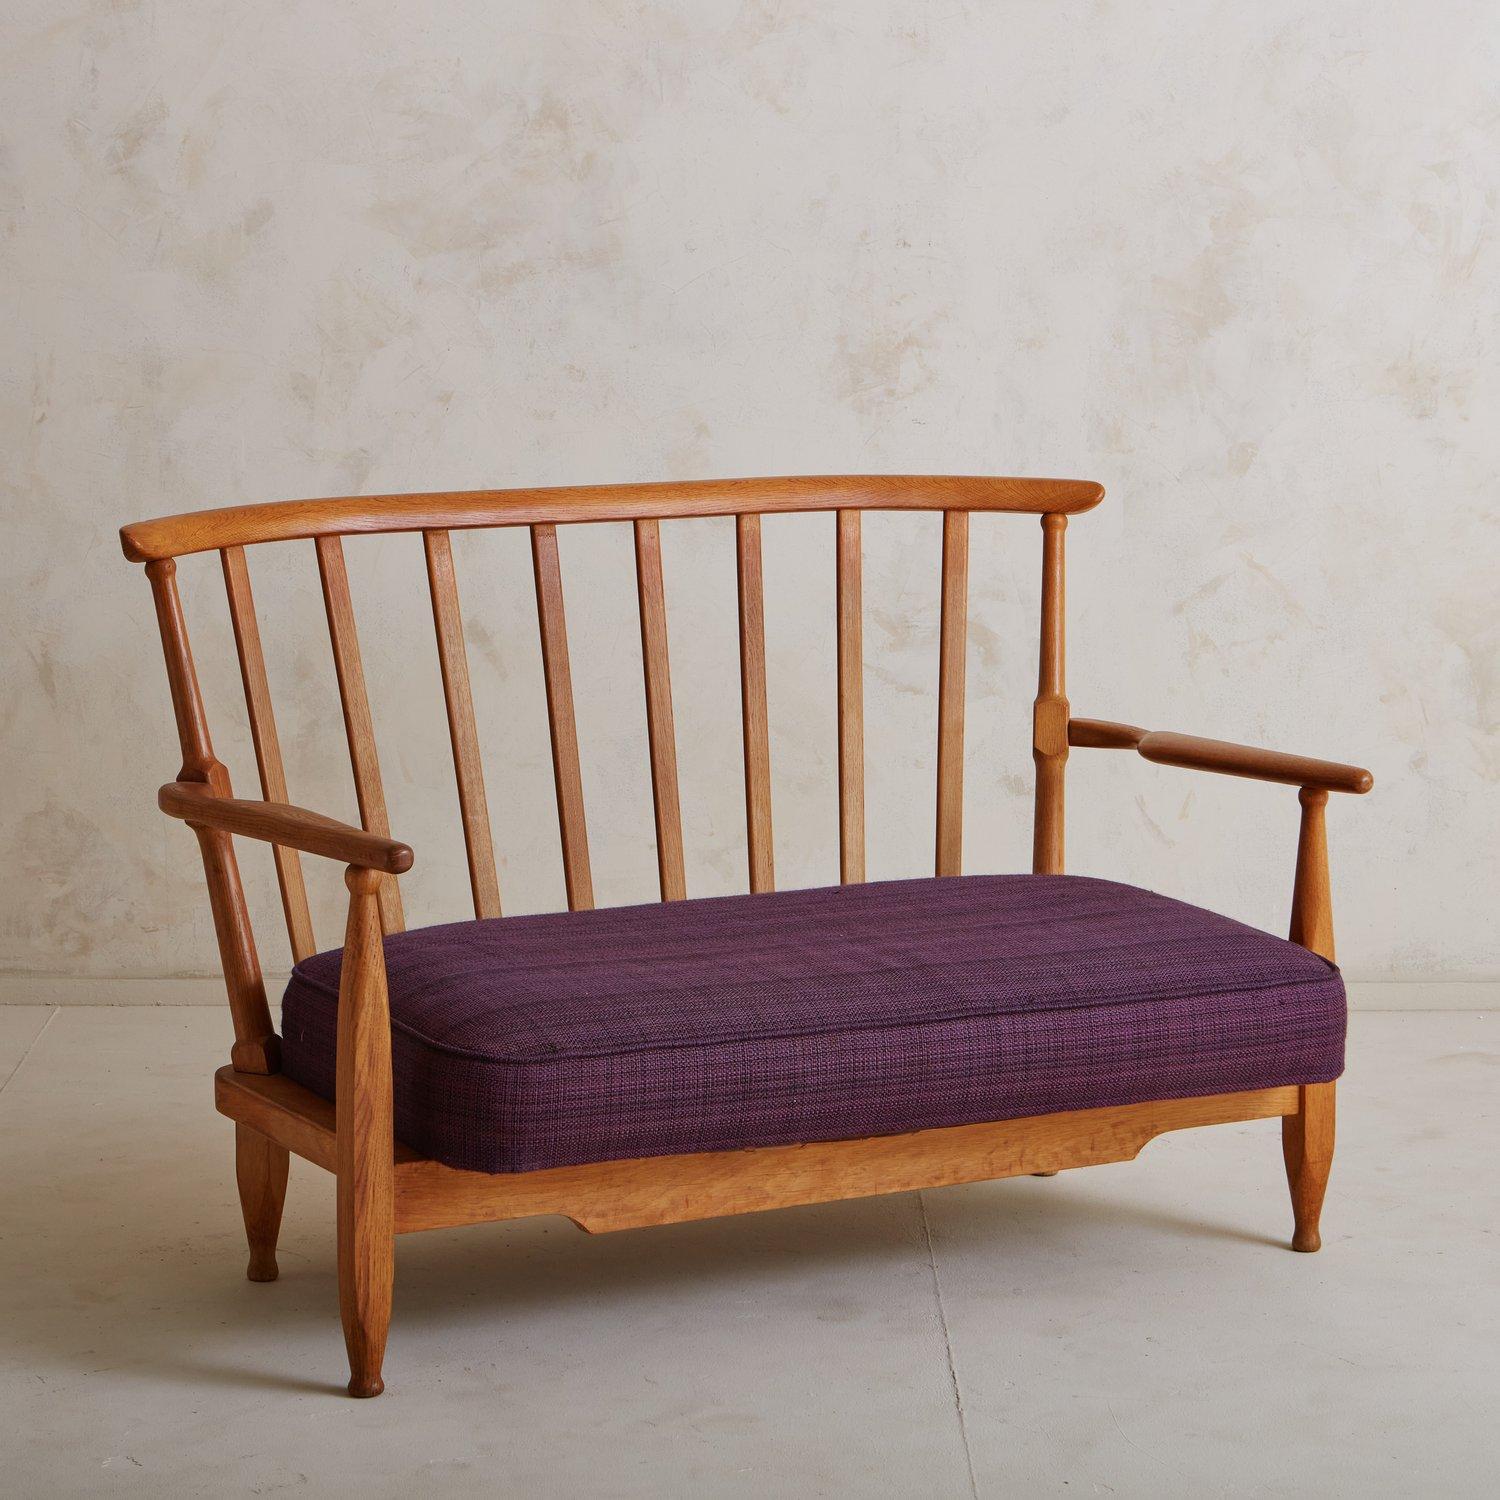 A Mid Century French settee by Guillerme et Chambron constructed with oak. This timeless piece features beautiful carved details and an elegant, angled spindle back. It has two removable cushions in their original purple fabric. Unmarked. Sourced in